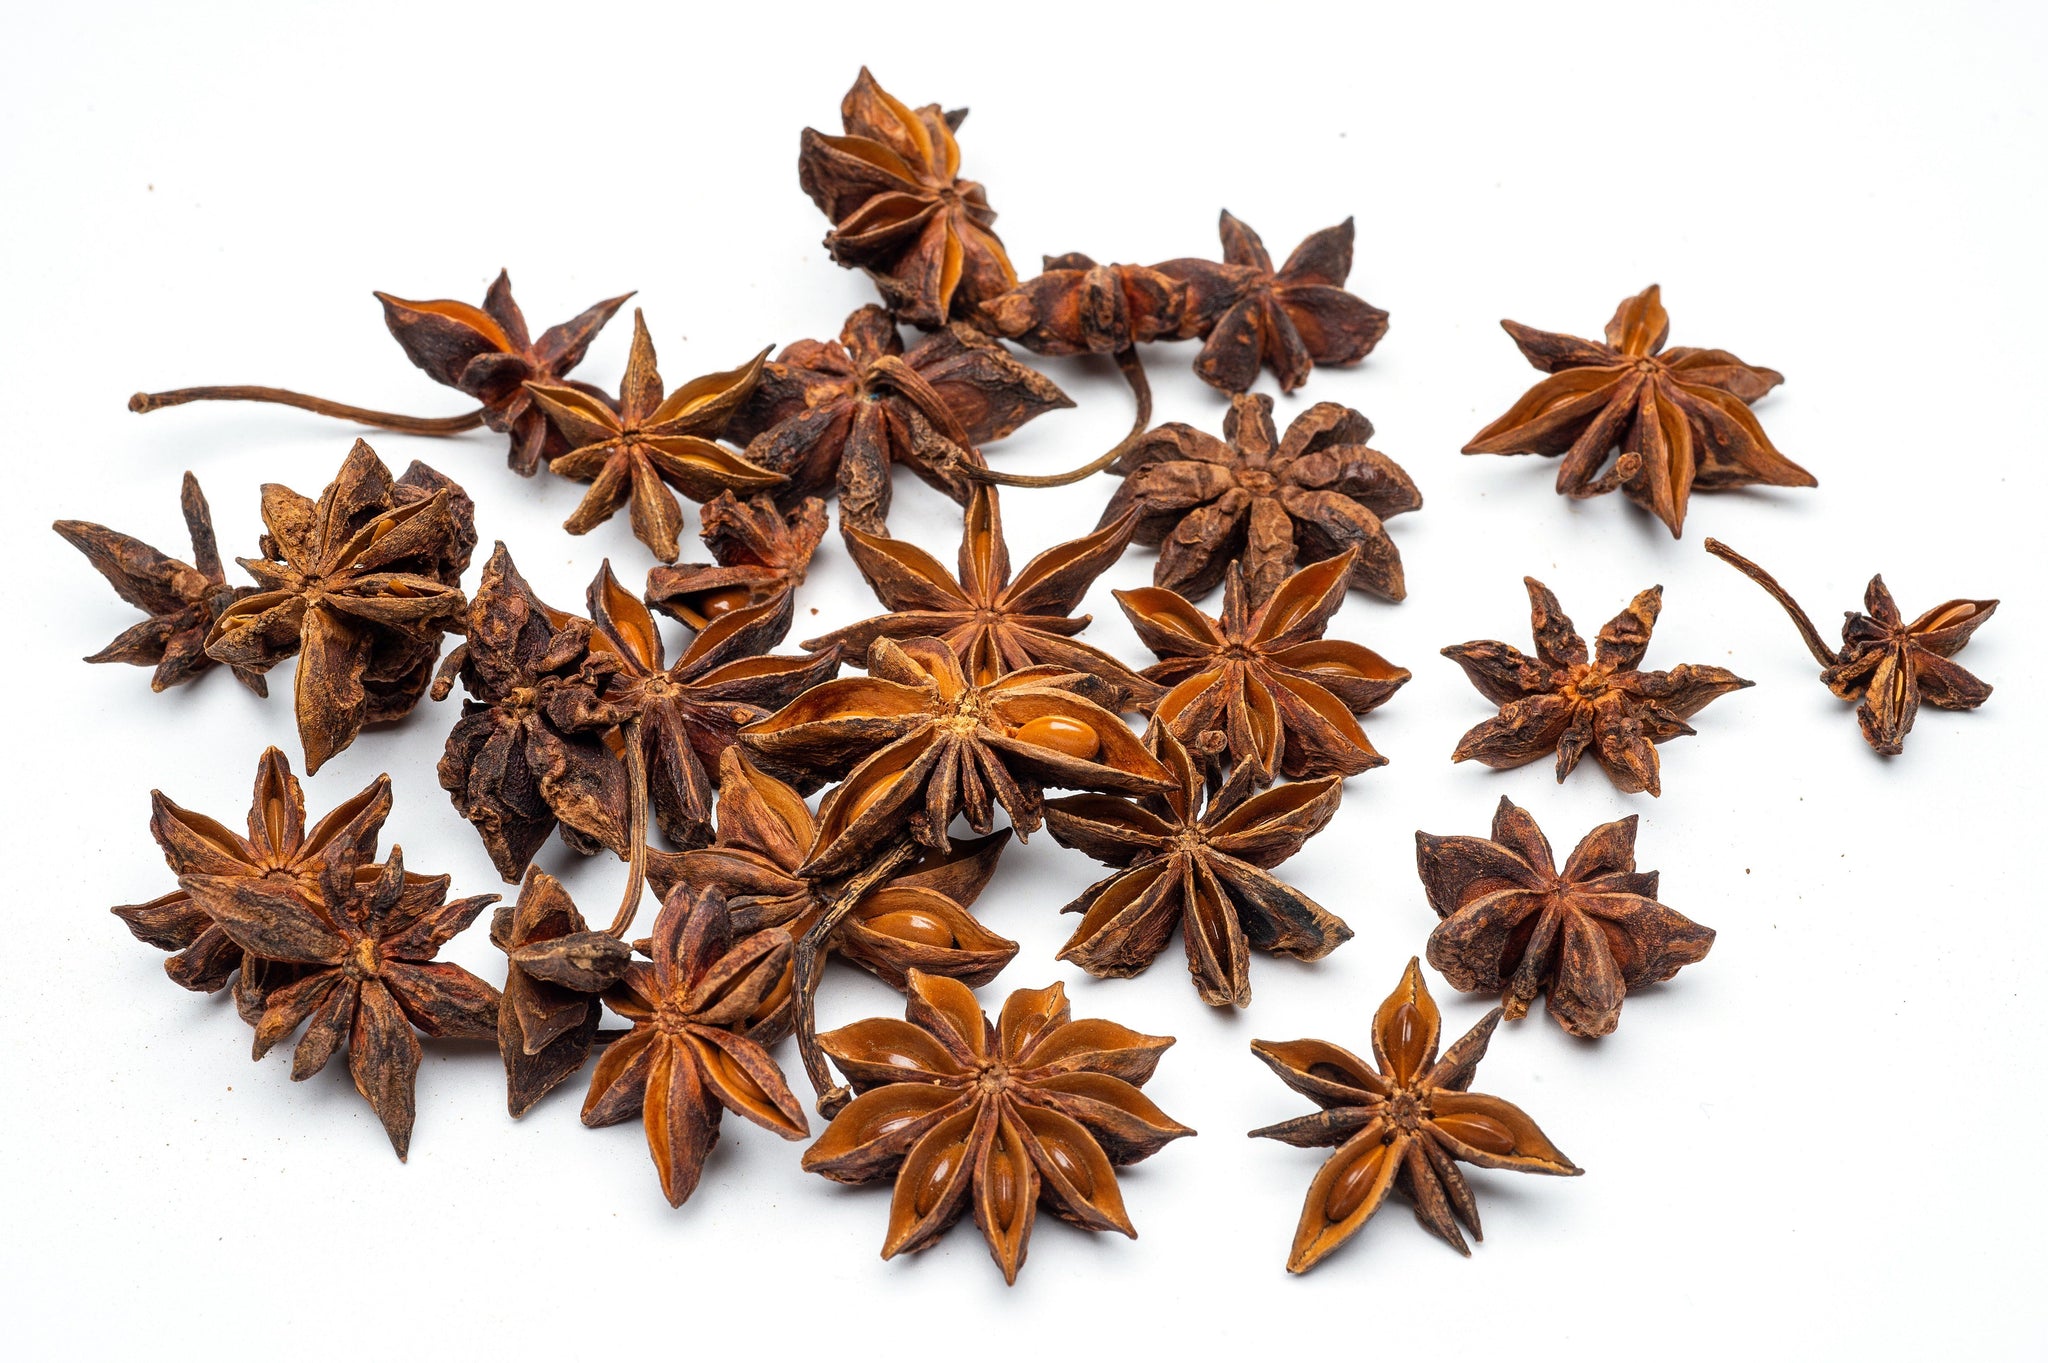 Whole Star Anise Pods, Vietnam spices Slofoodgroup 